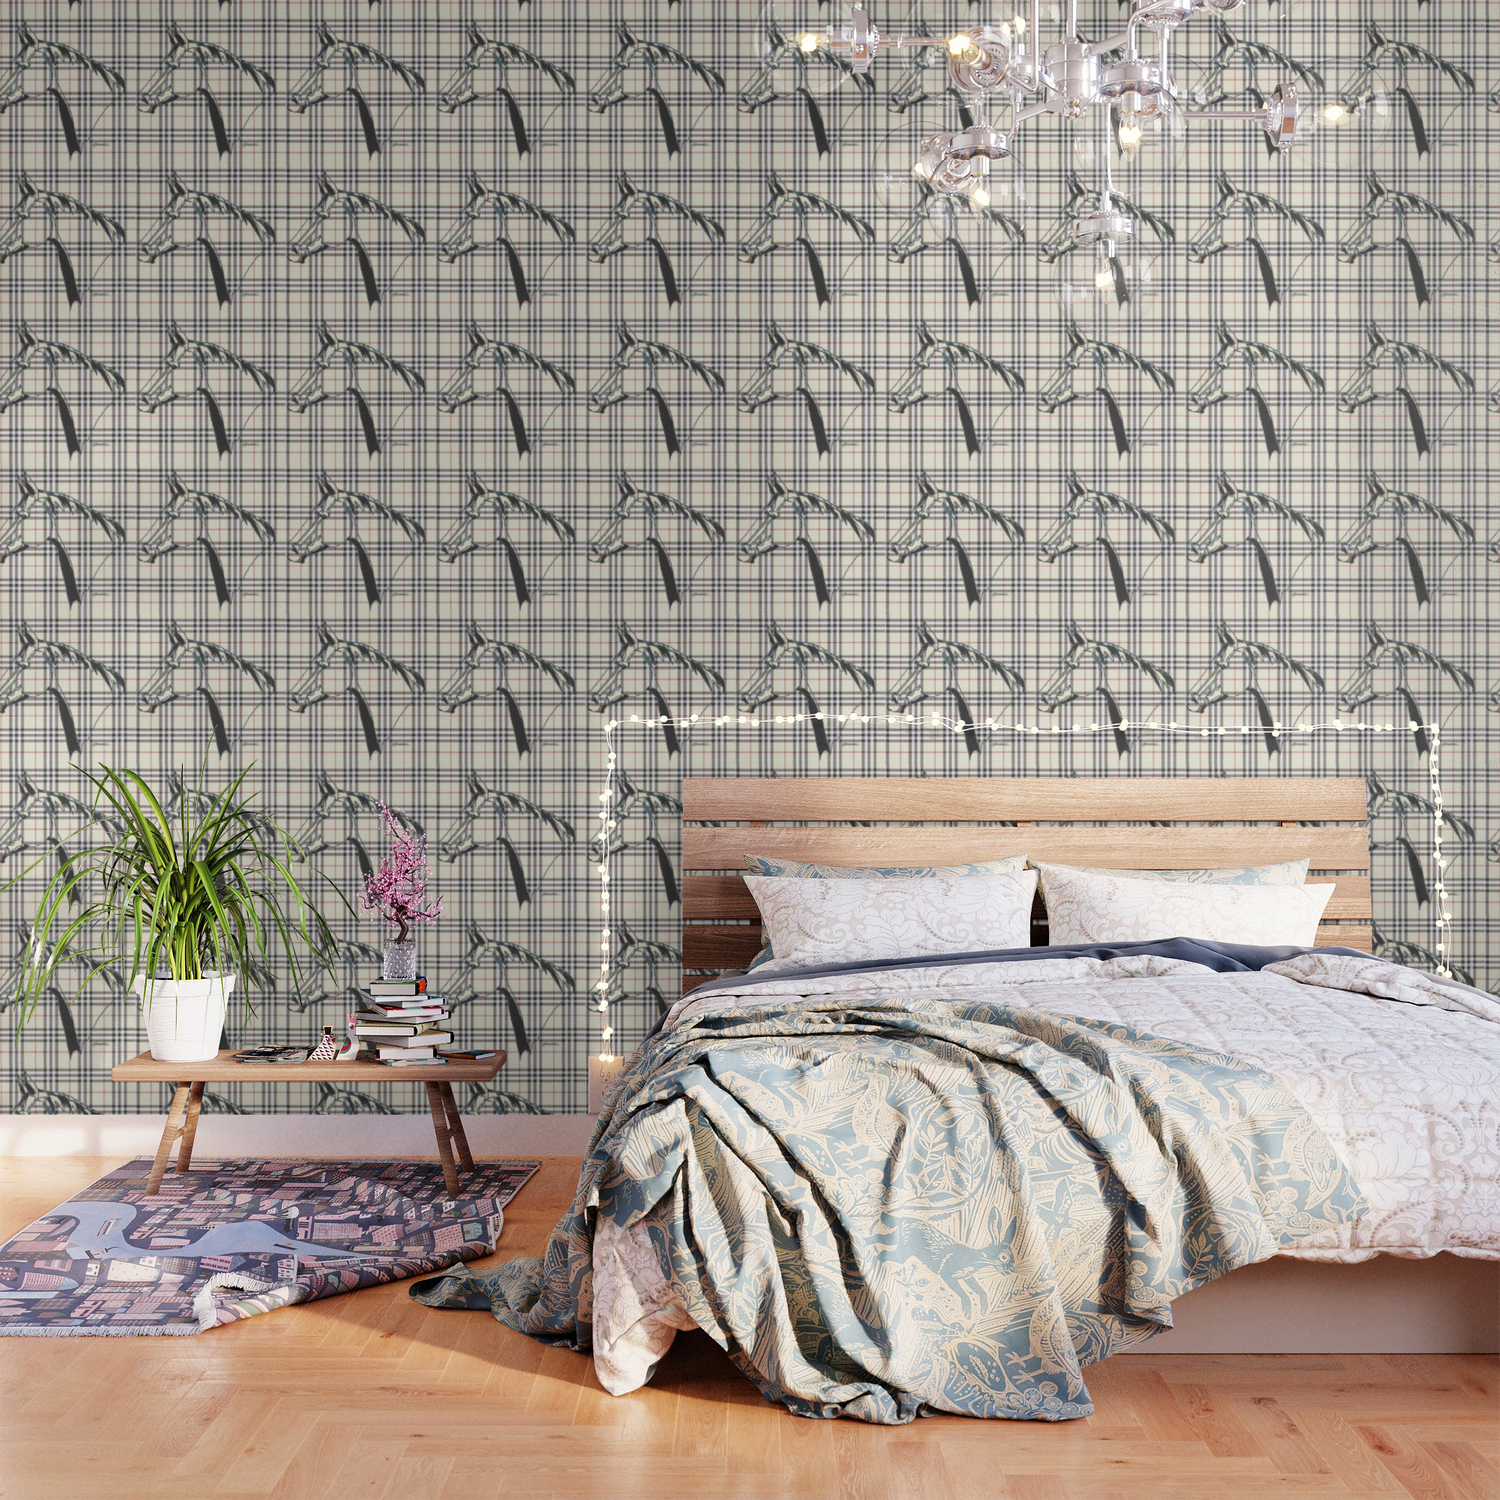 Equine Plaid Wallpaper By Giftsforyou Society6